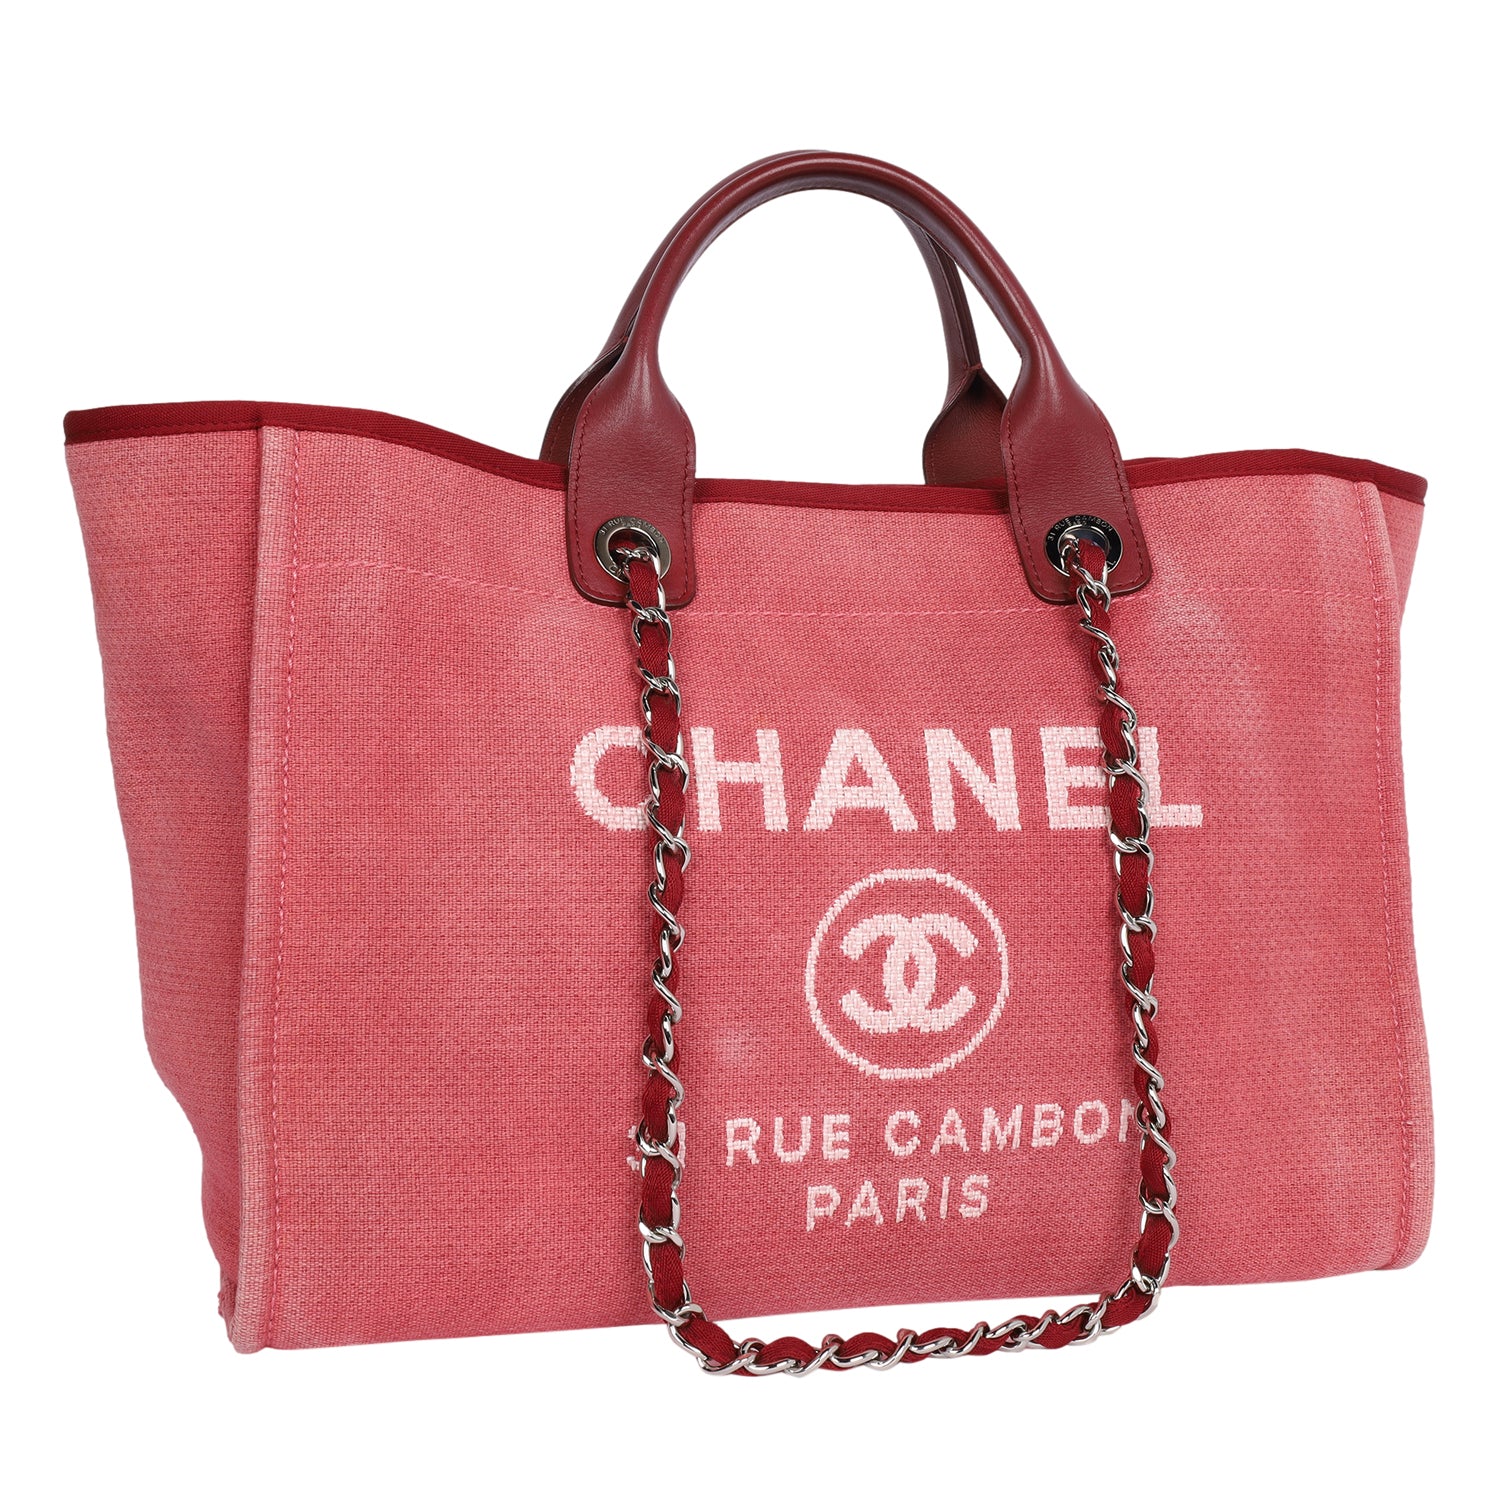 CHANEL, Bags, Authentic Chanel Cambon Large Tote Black And Pink